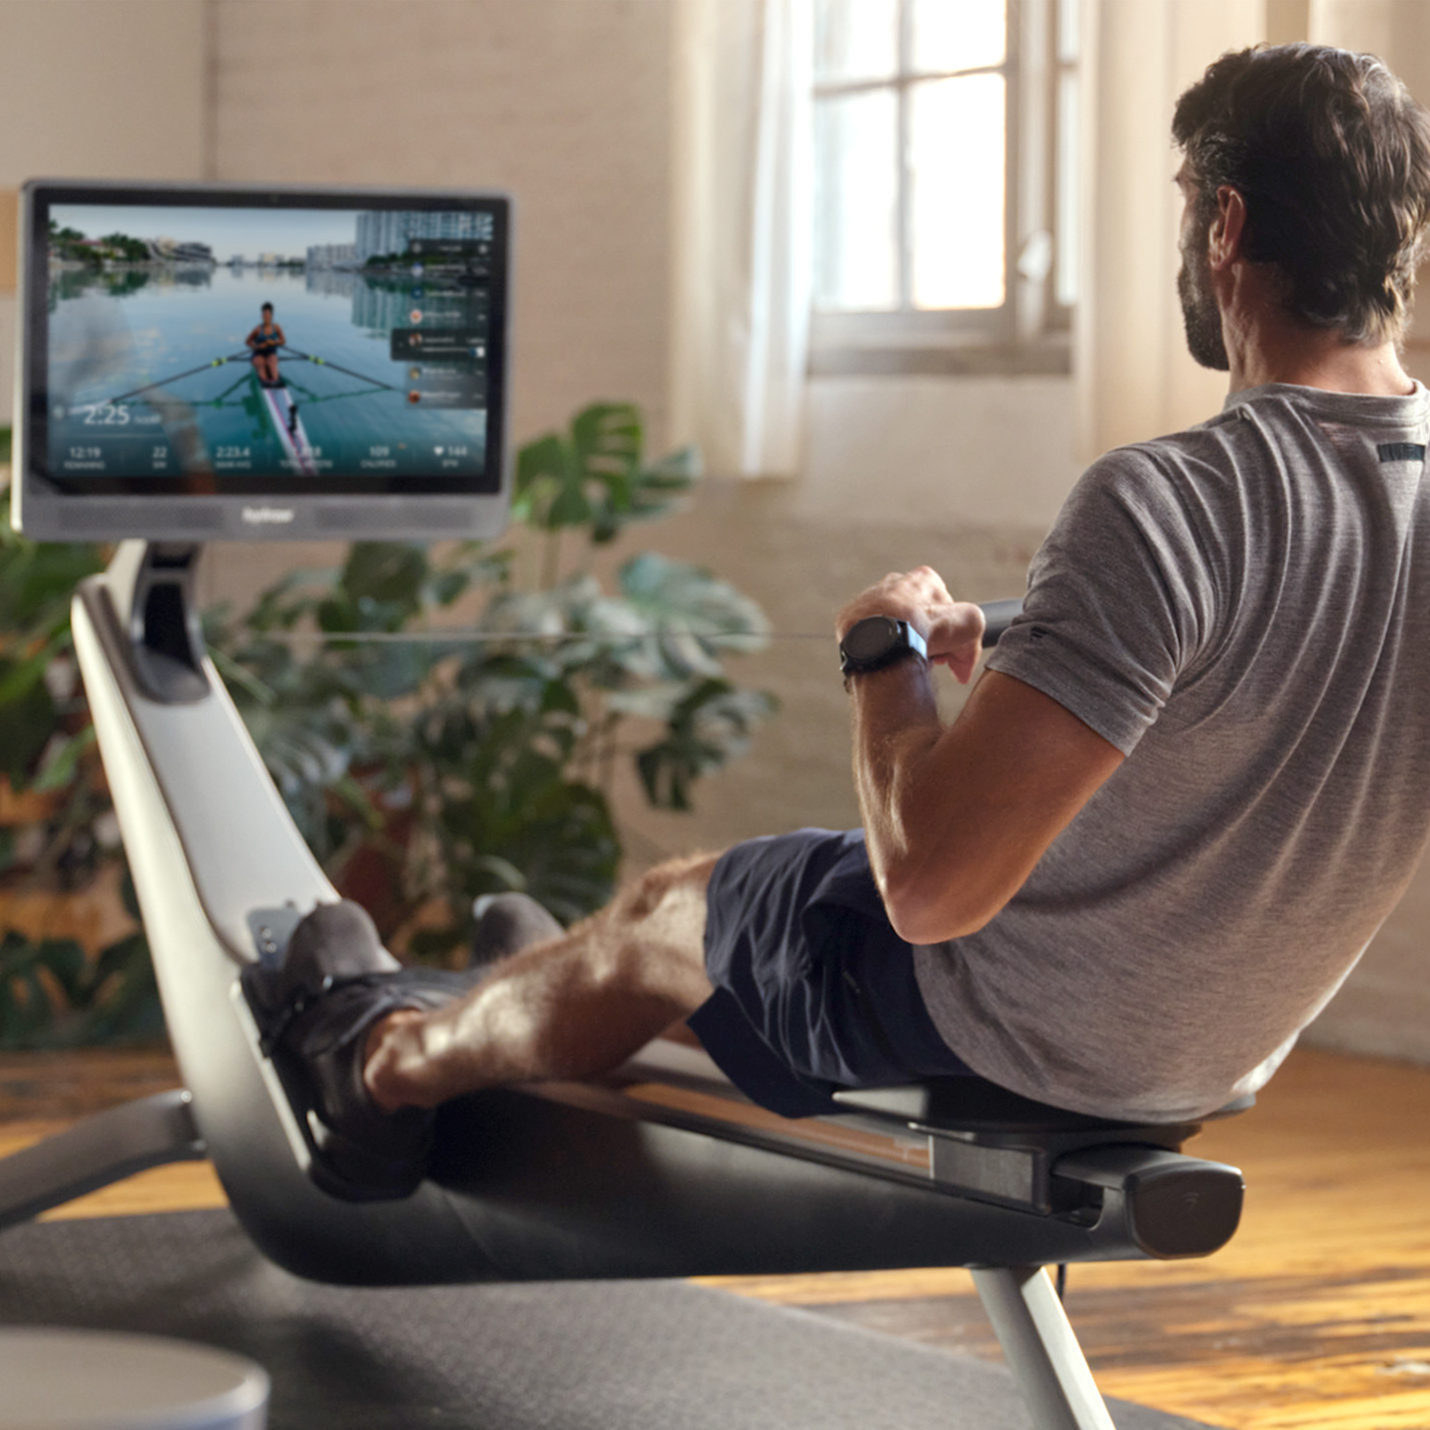 person using the rowing machine following along to a rowing video on the screen